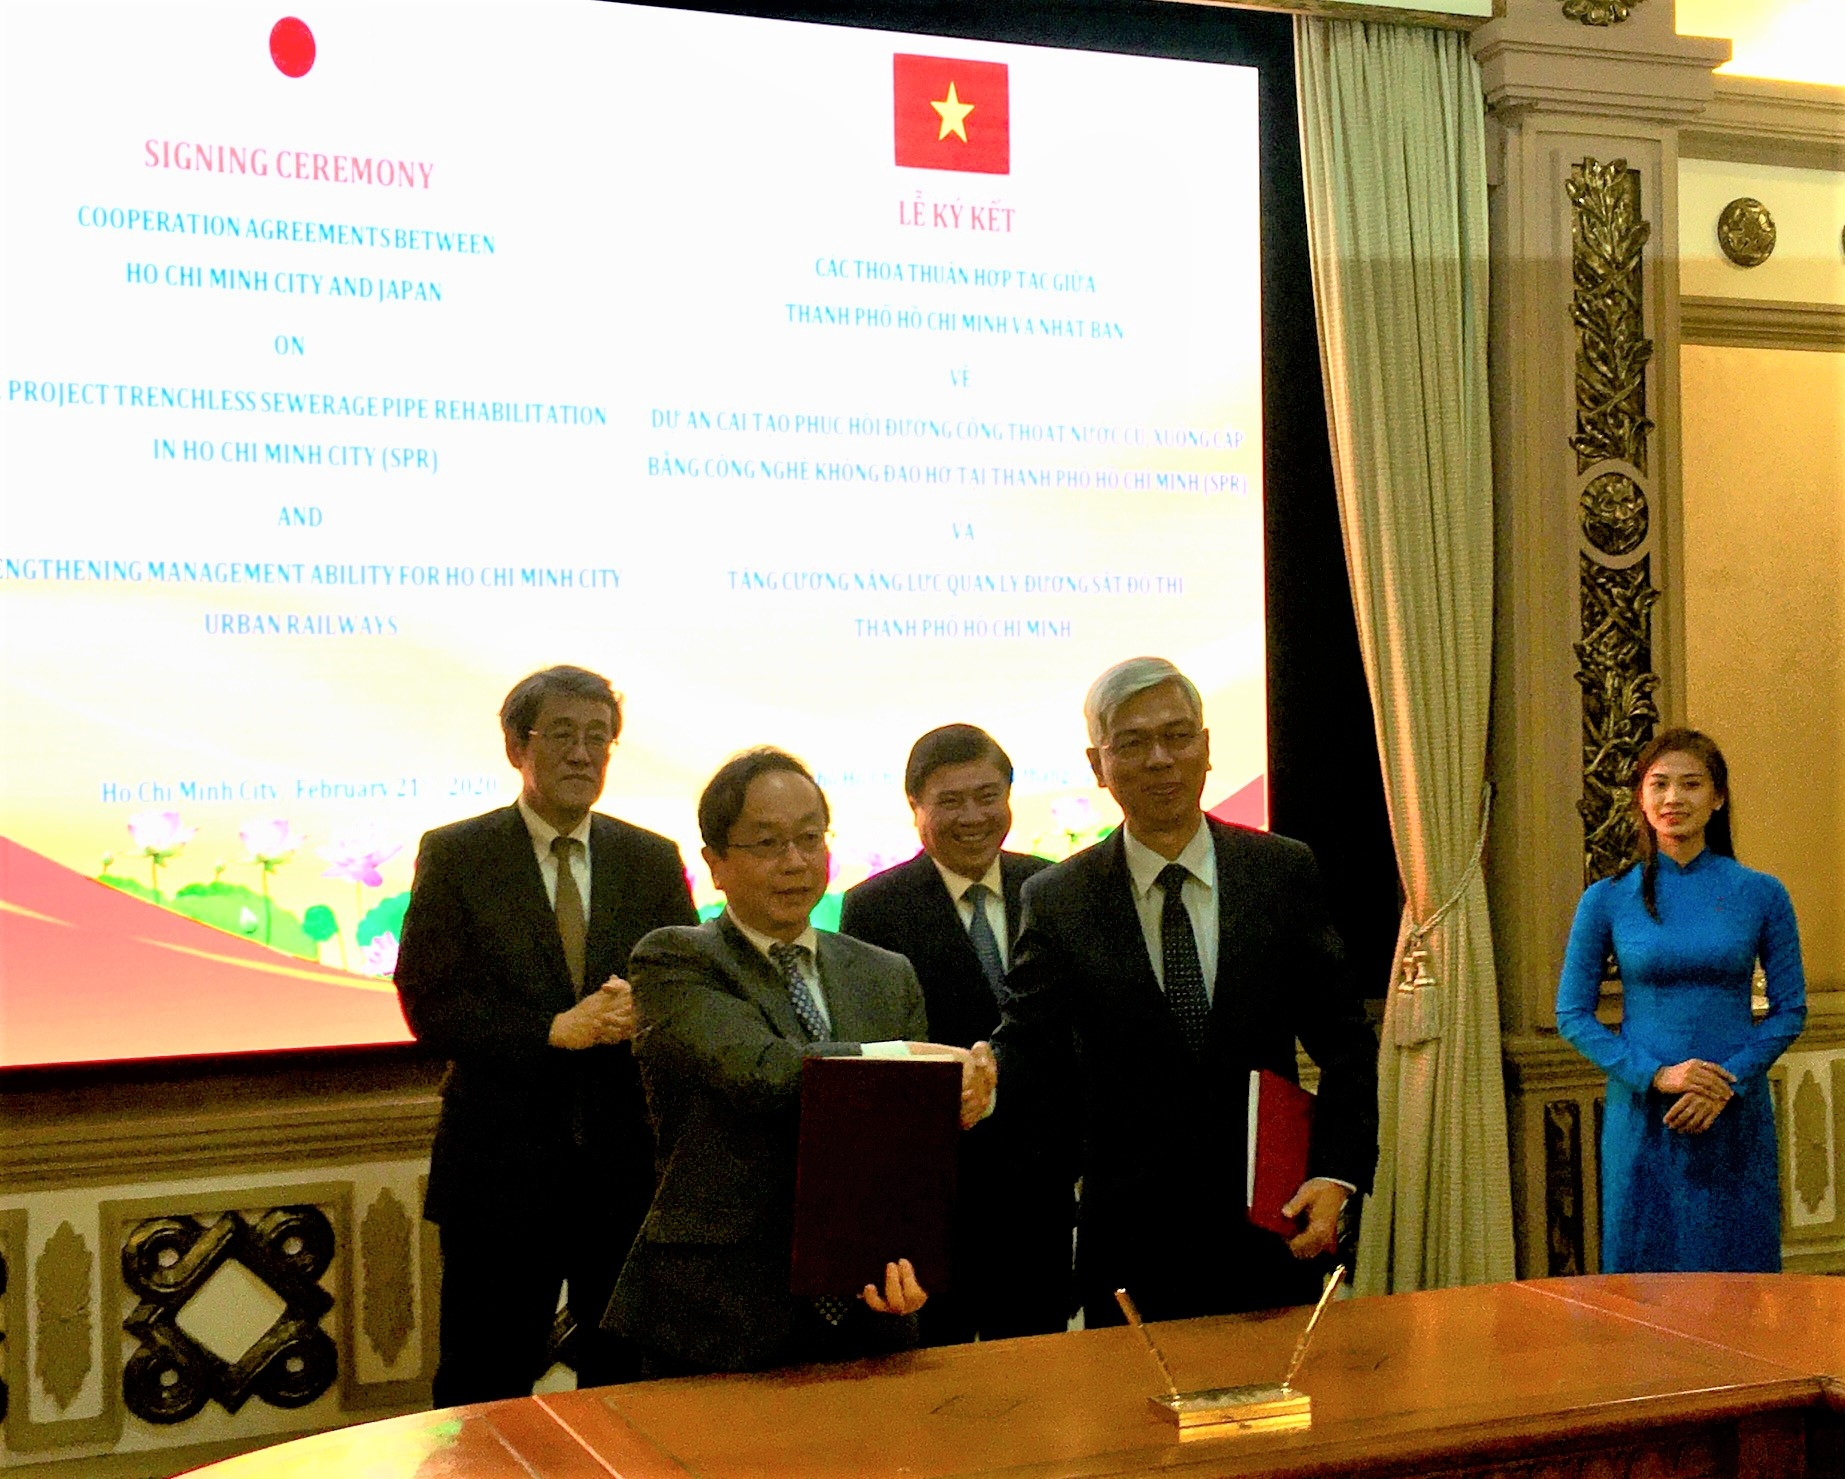 JICA supports trenchless sewerage pipe rehabilitation in Ho Chi Minh City